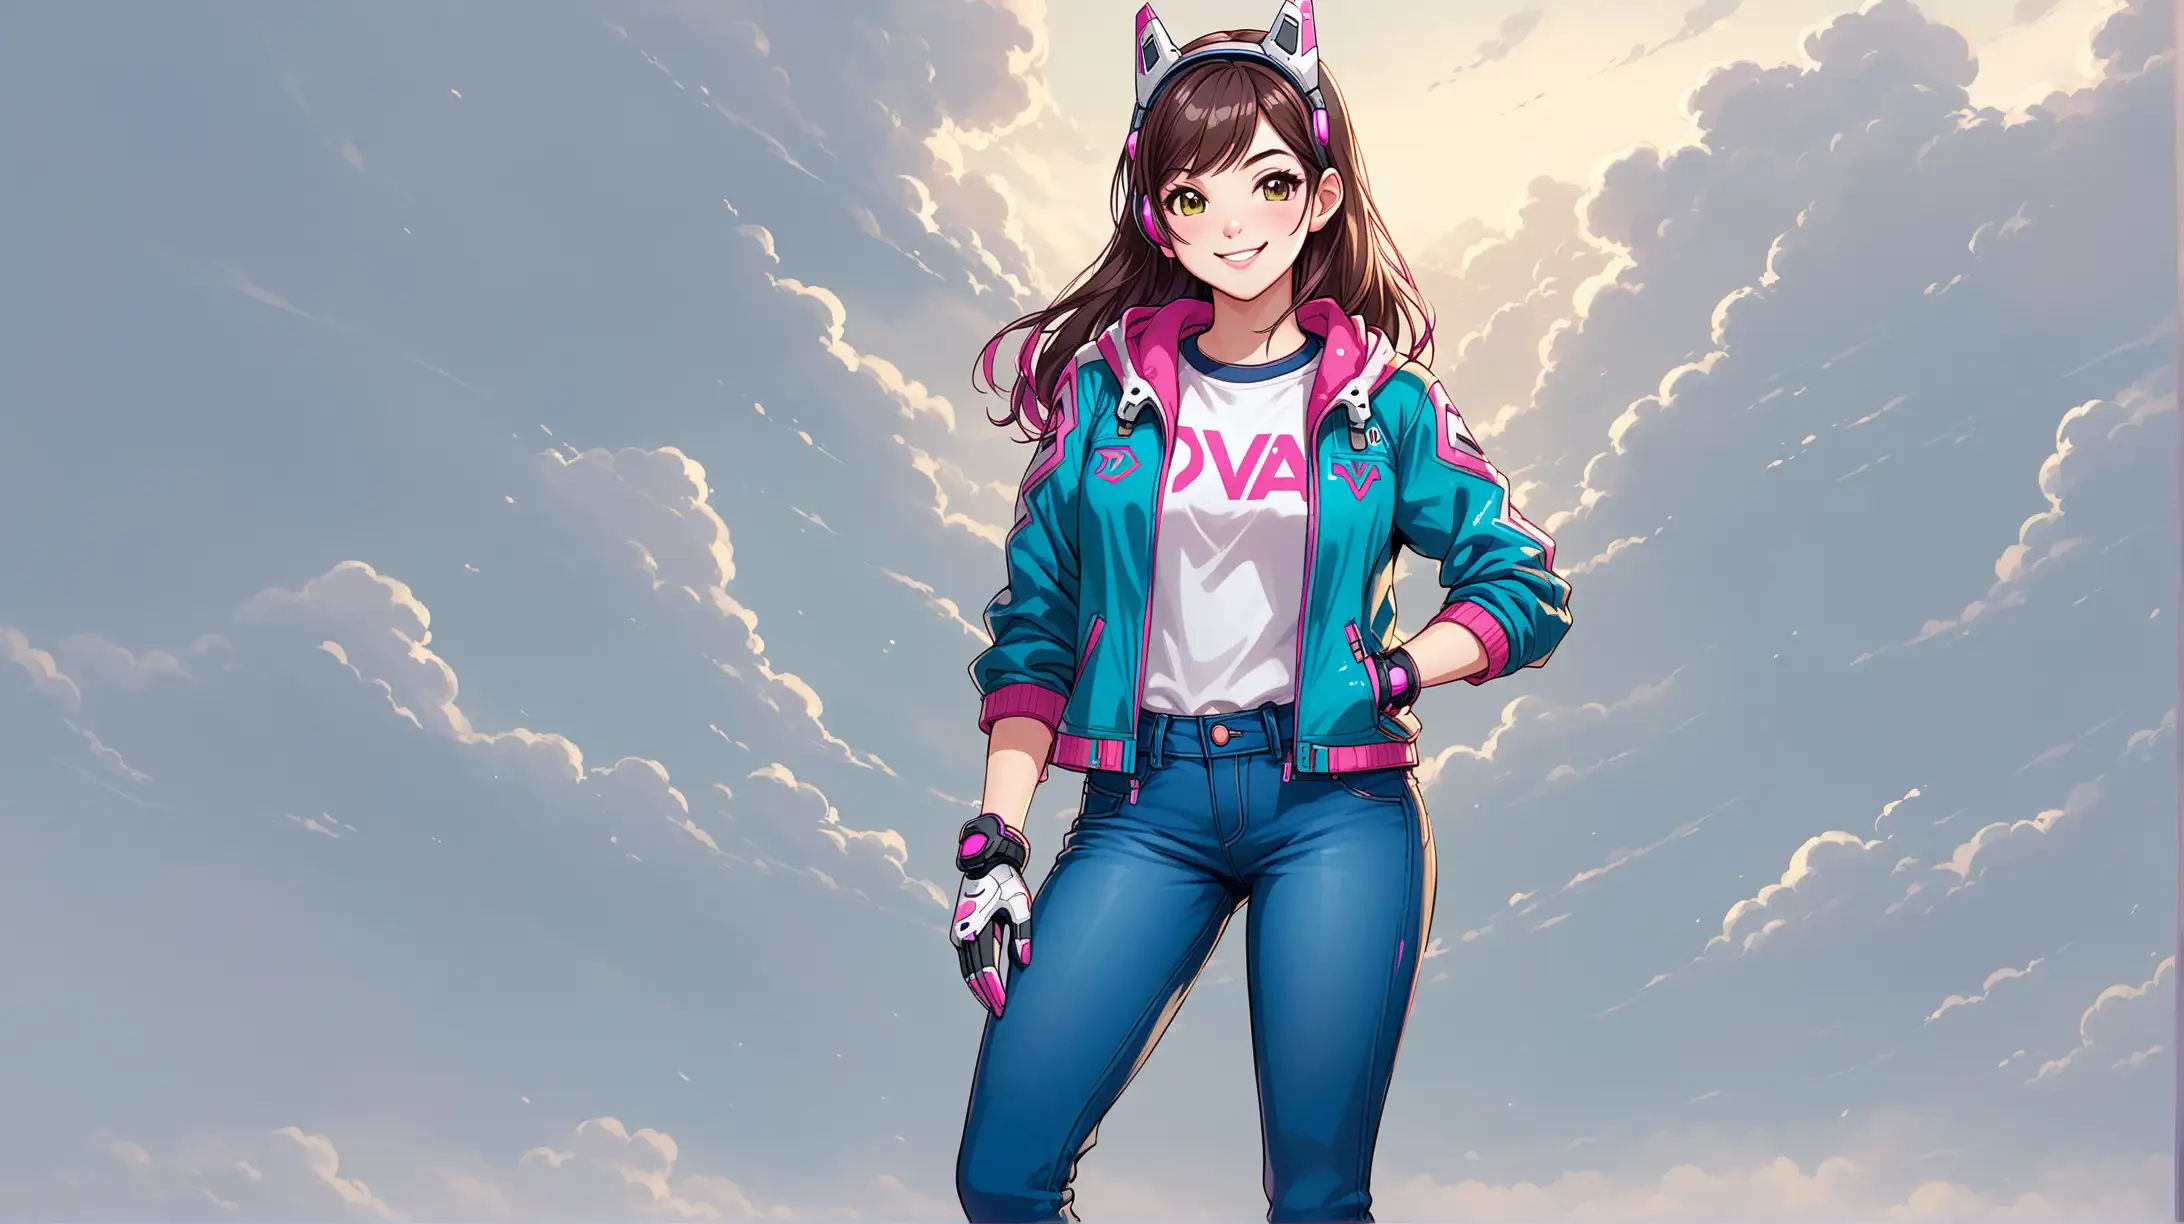 Draw the character D.Va, standing in a relaxed pose, outside on an overcast day, wearing jeans and a jacket, smiling at the viewer